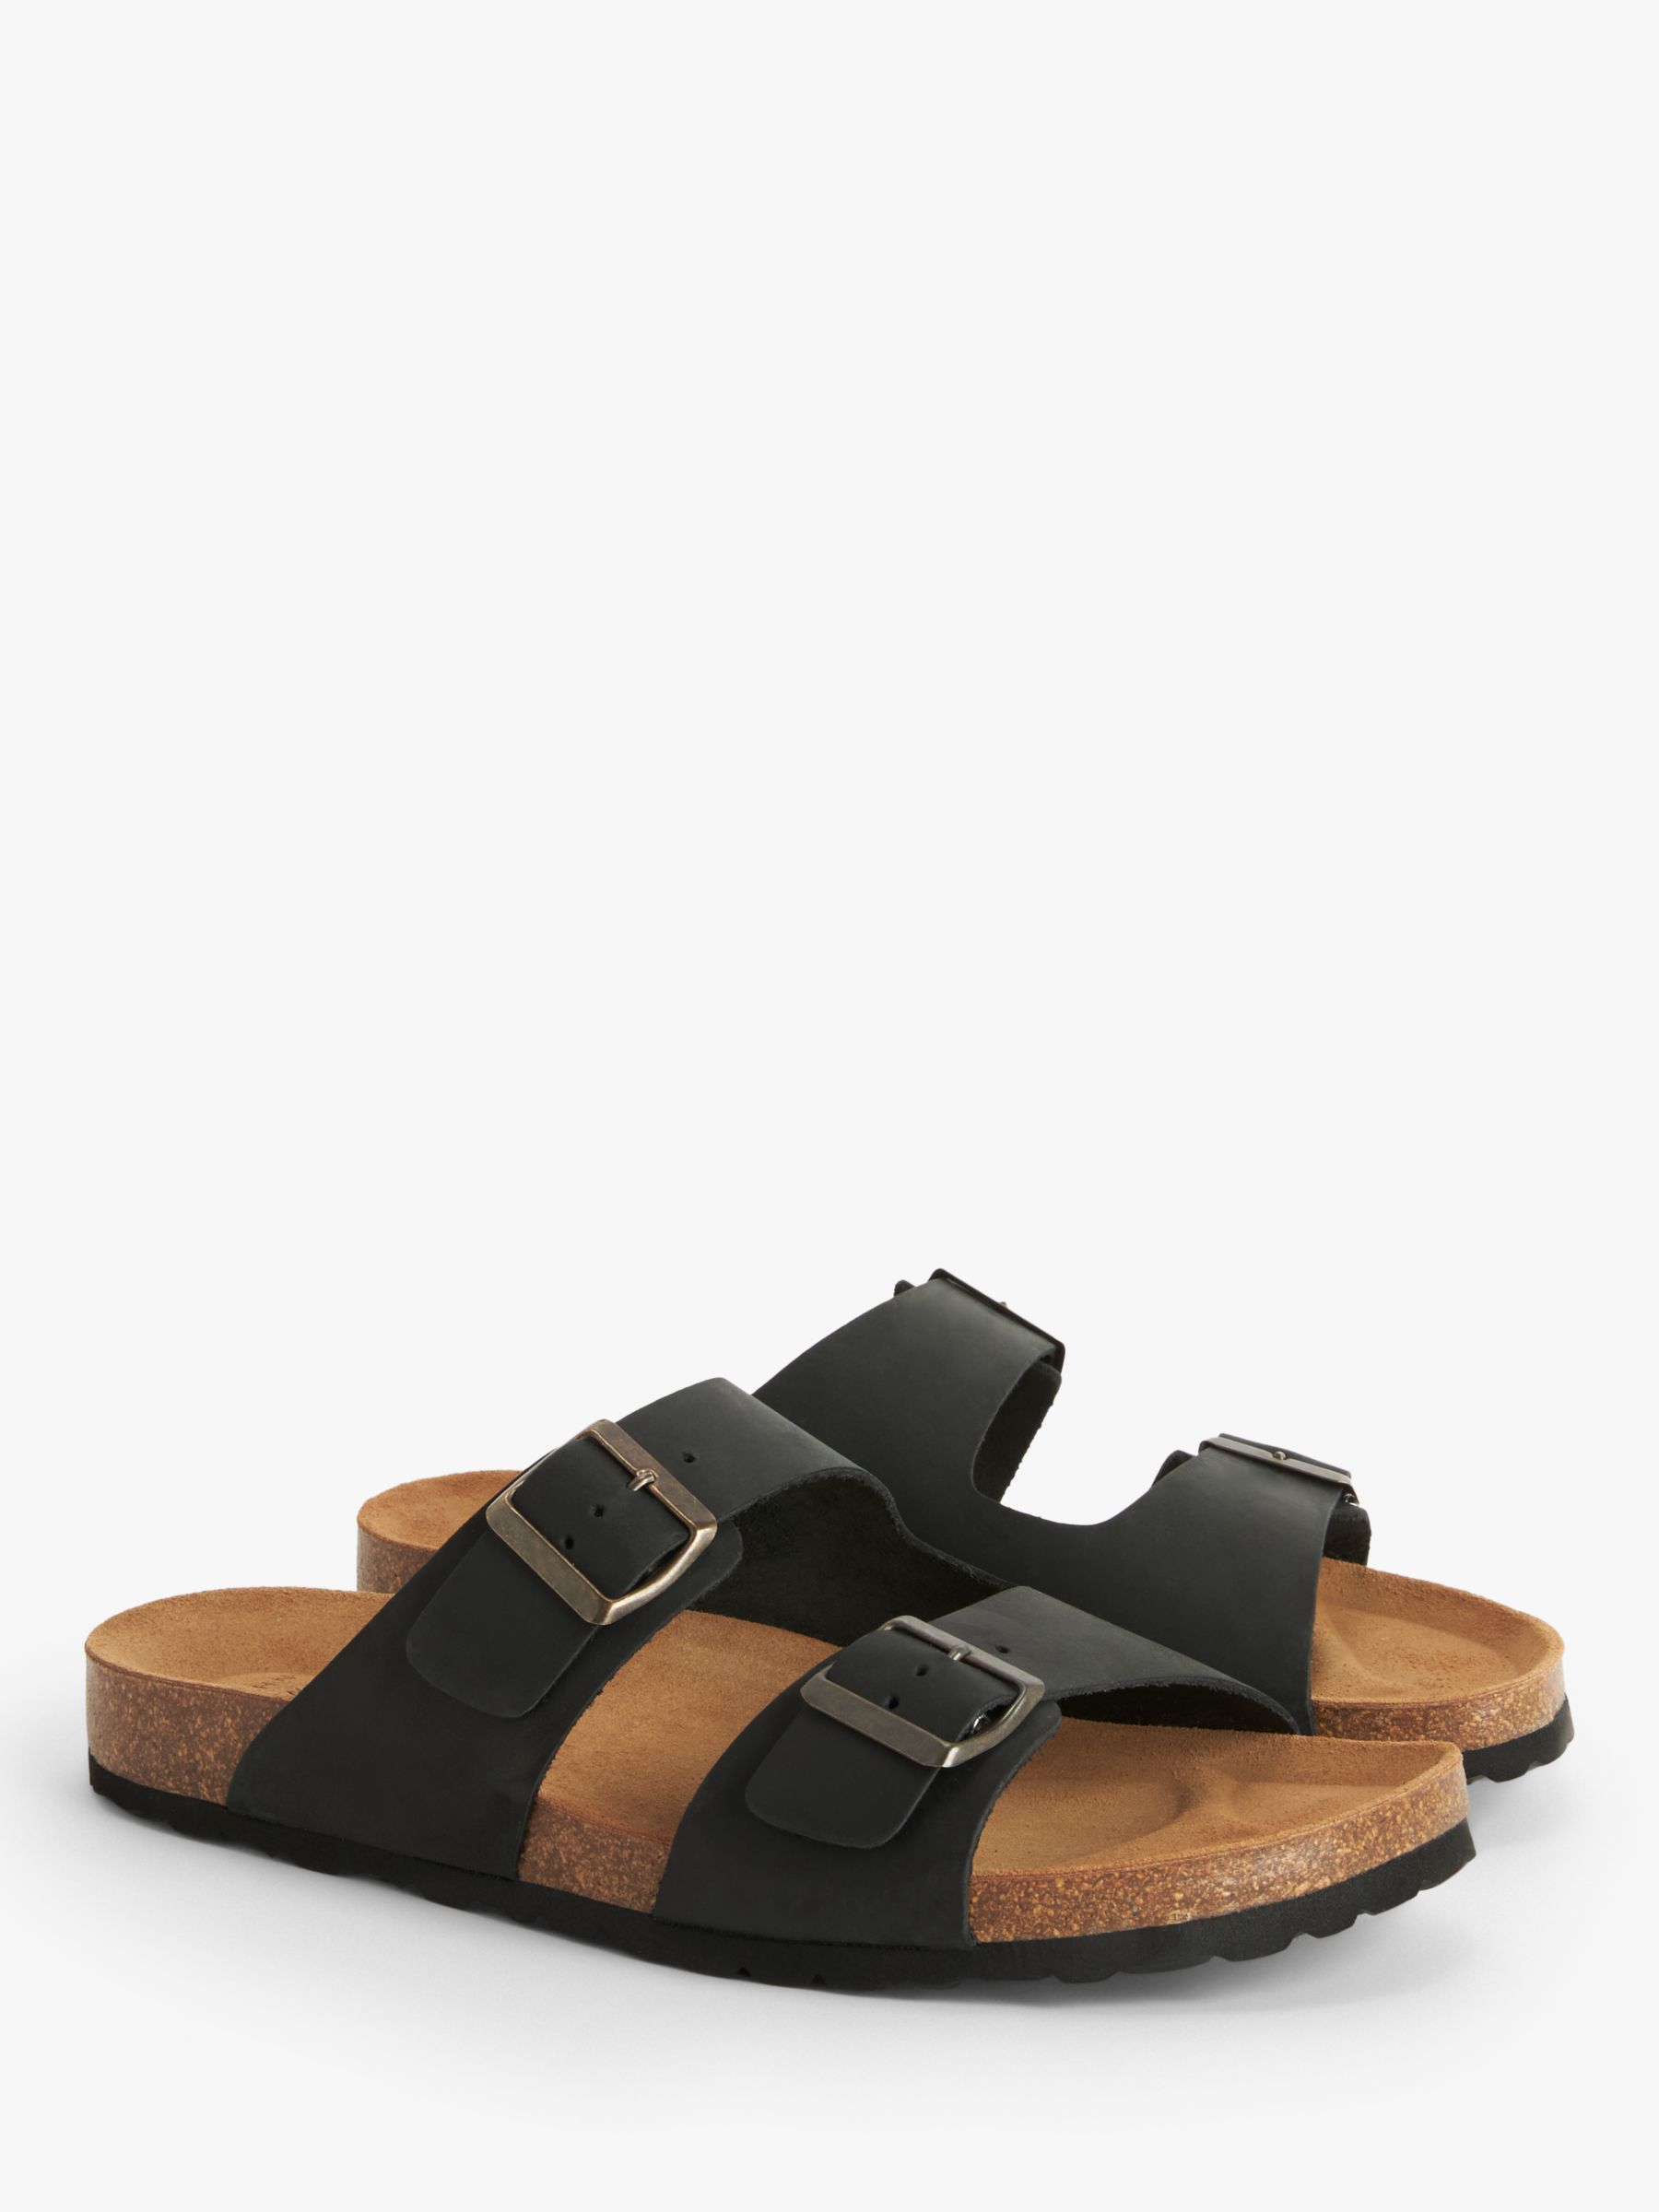 John Lewis Two Strap Footbed Leather Sandals, Black, 7